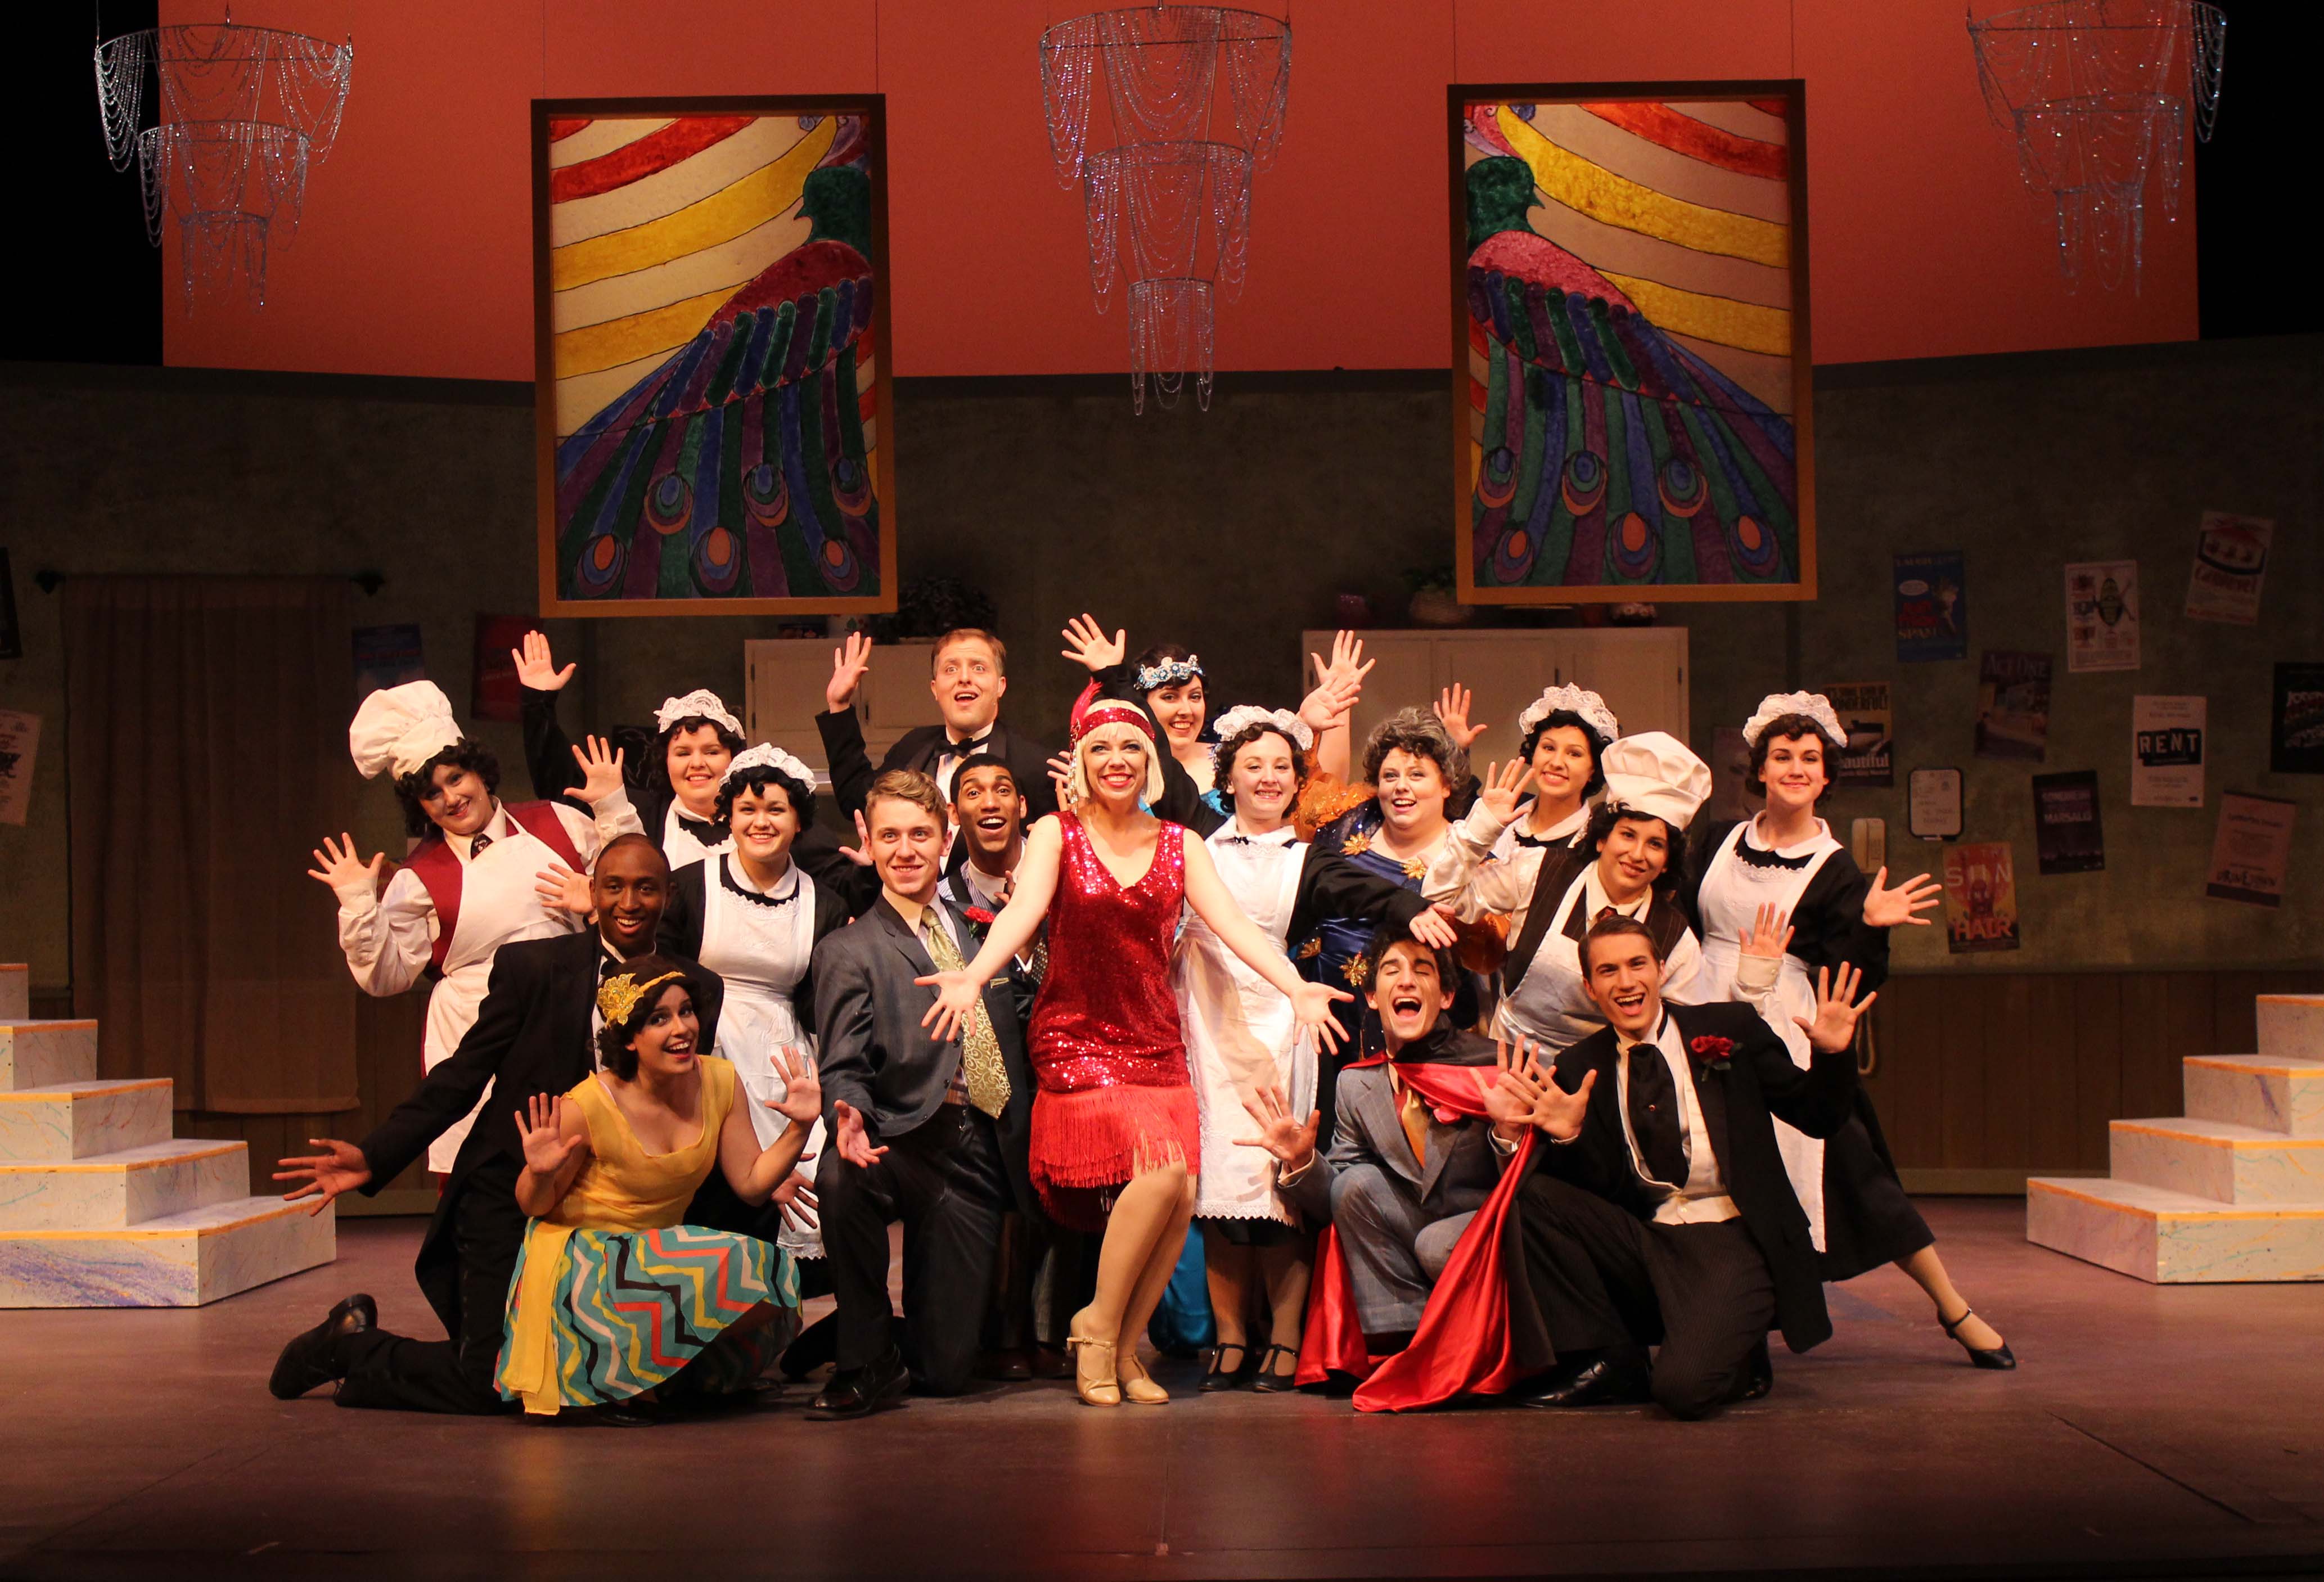 A scene from The Drowsy Chaperone